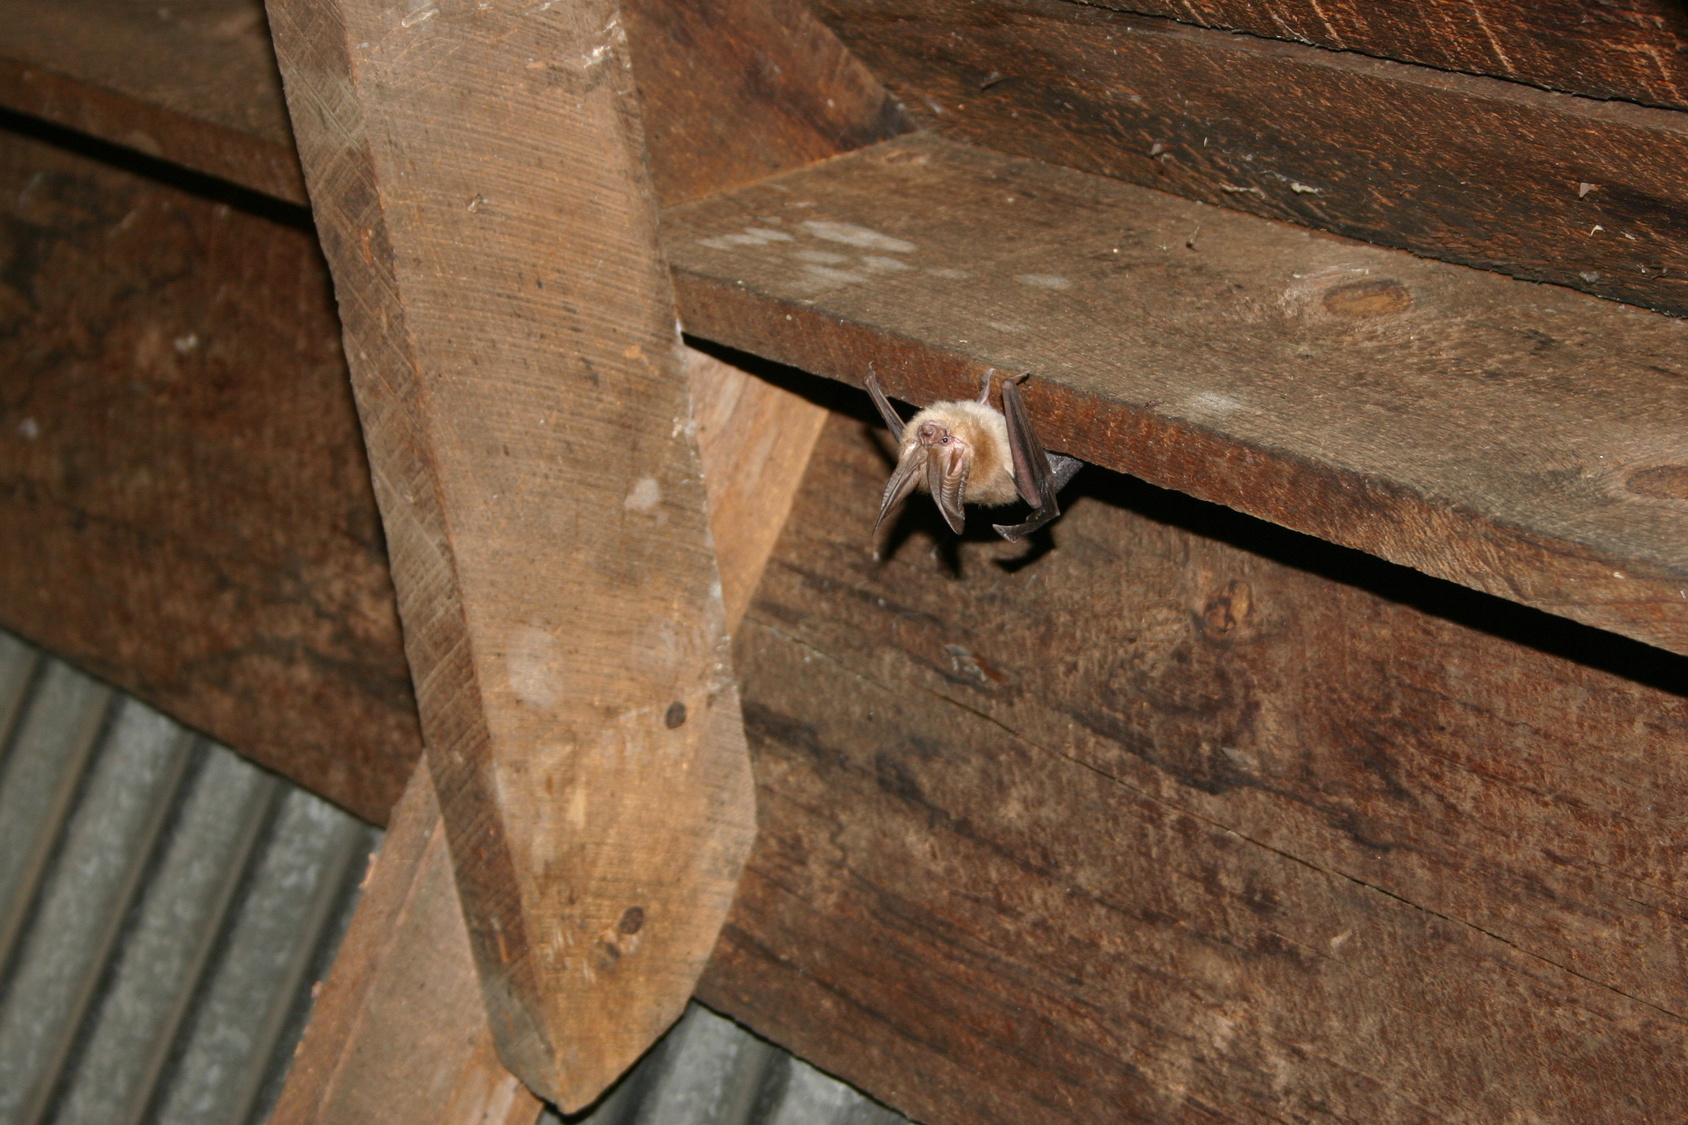 How to Know If There Are Animals in the Attic - Animal Control Specialists